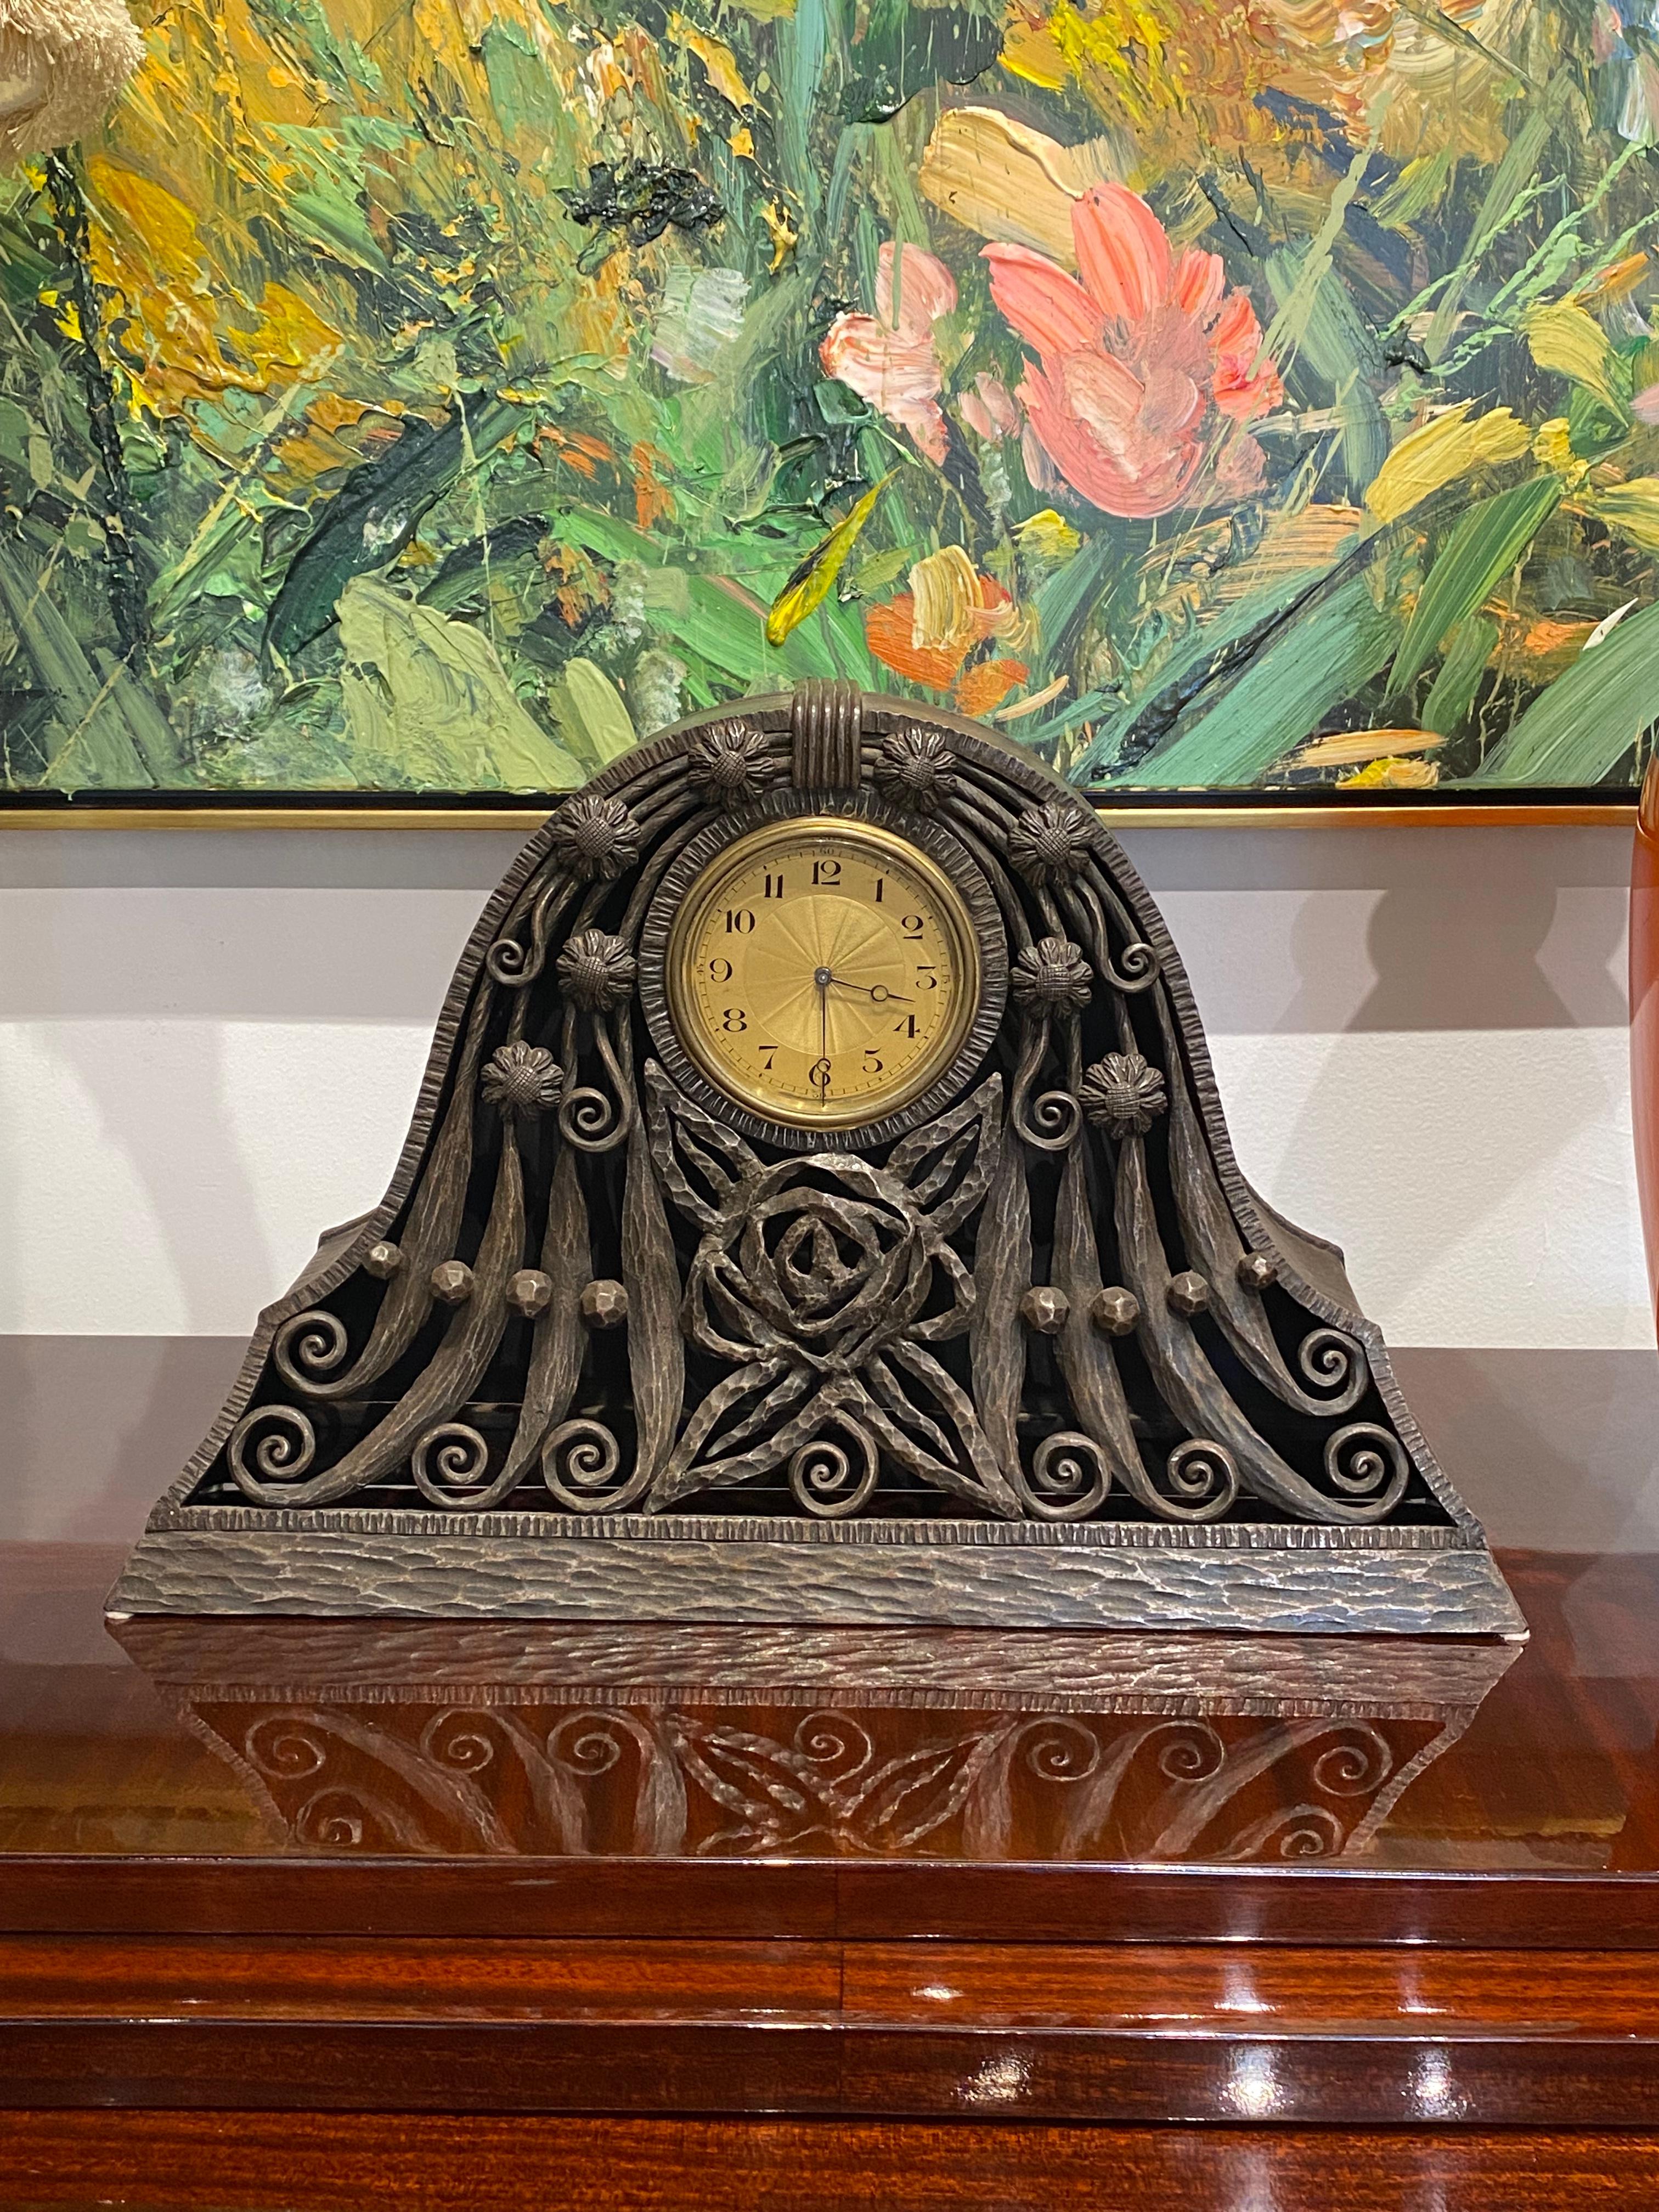 Art Deco mantle clock made of wrought iron depicting deco flowers.
Made in France
Circa: 1925.